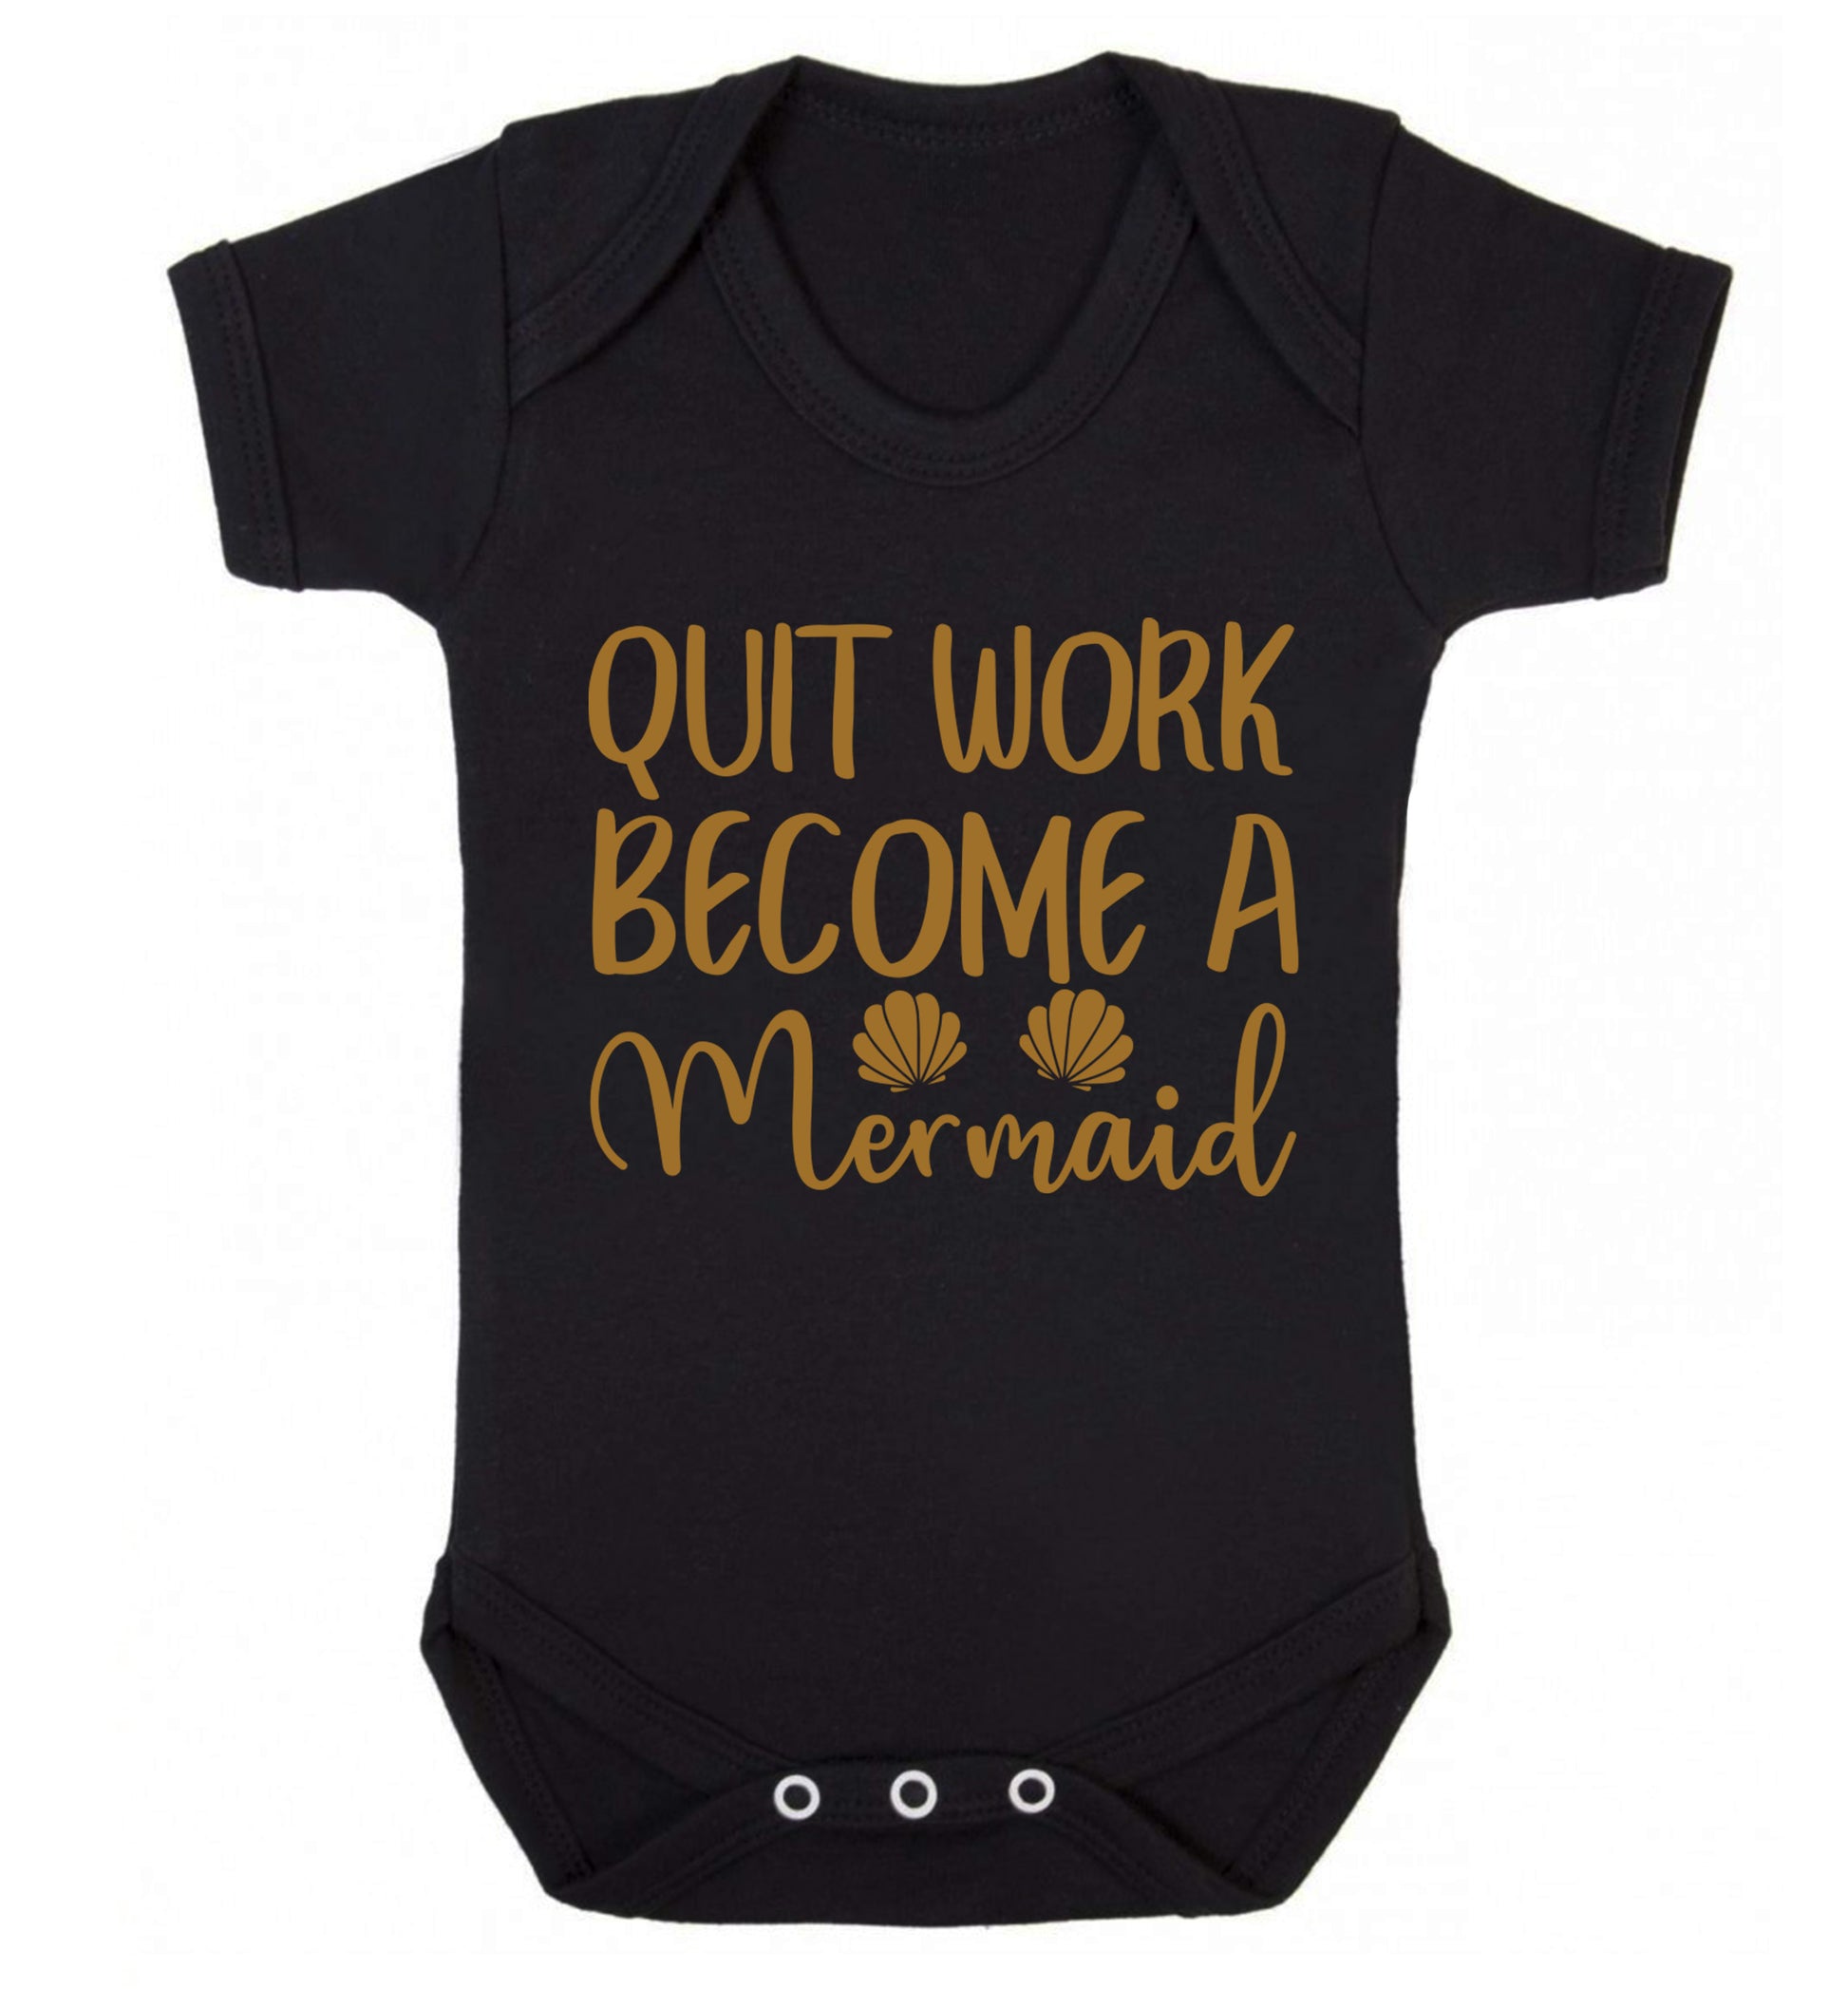 Quit work become a mermaid Baby Vest black 18-24 months